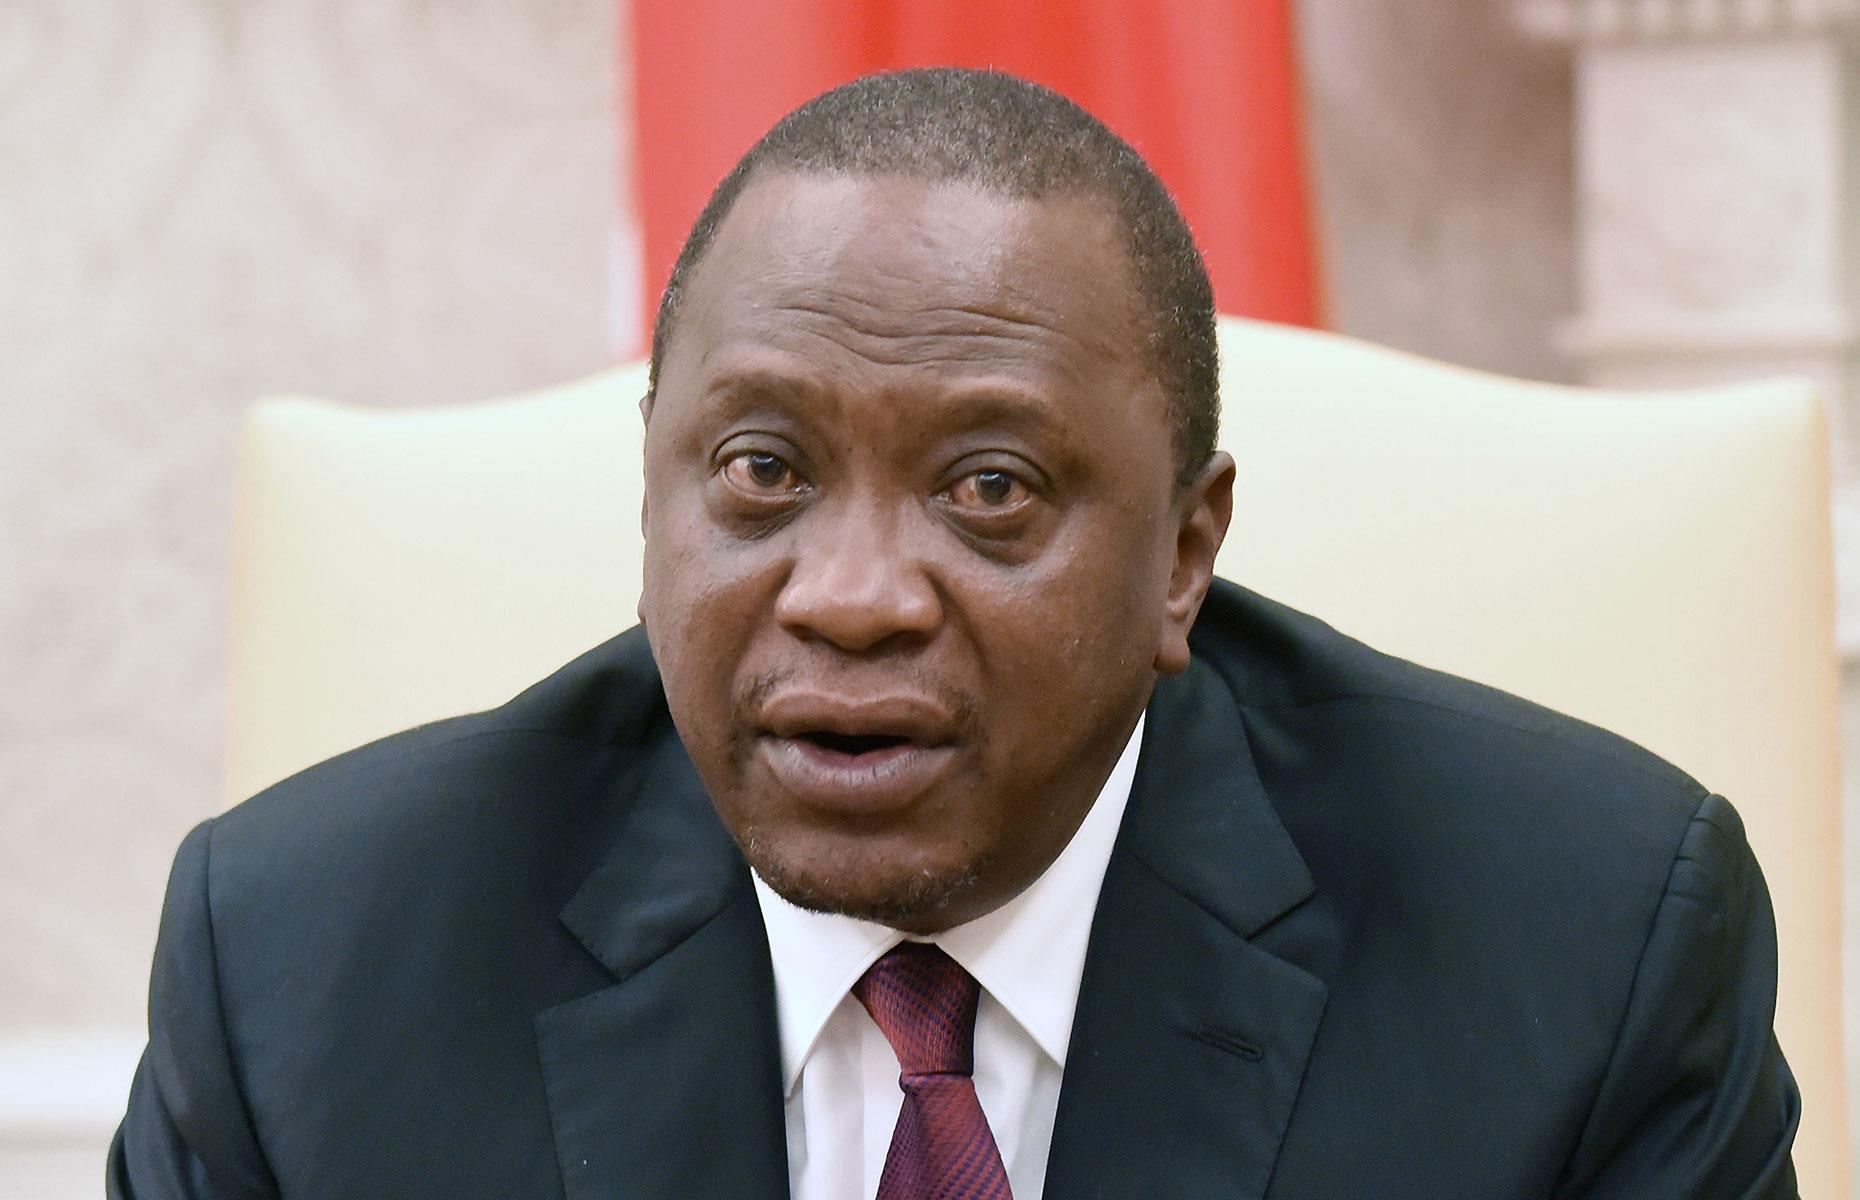 <p>Kenyan president Uhuru Kenyatta is the title holder of at least 500,000 acres of prime farmland in his home country. The land was inherited from his father Jomo Kenyatta, the first leader of Kenya. The politician also has a large stake in the nation's number one dairy company, as well as shares in a commercial bank and TV station. In 2011, <em>Forbes</em> estimated his net worth at $500 million.</p>